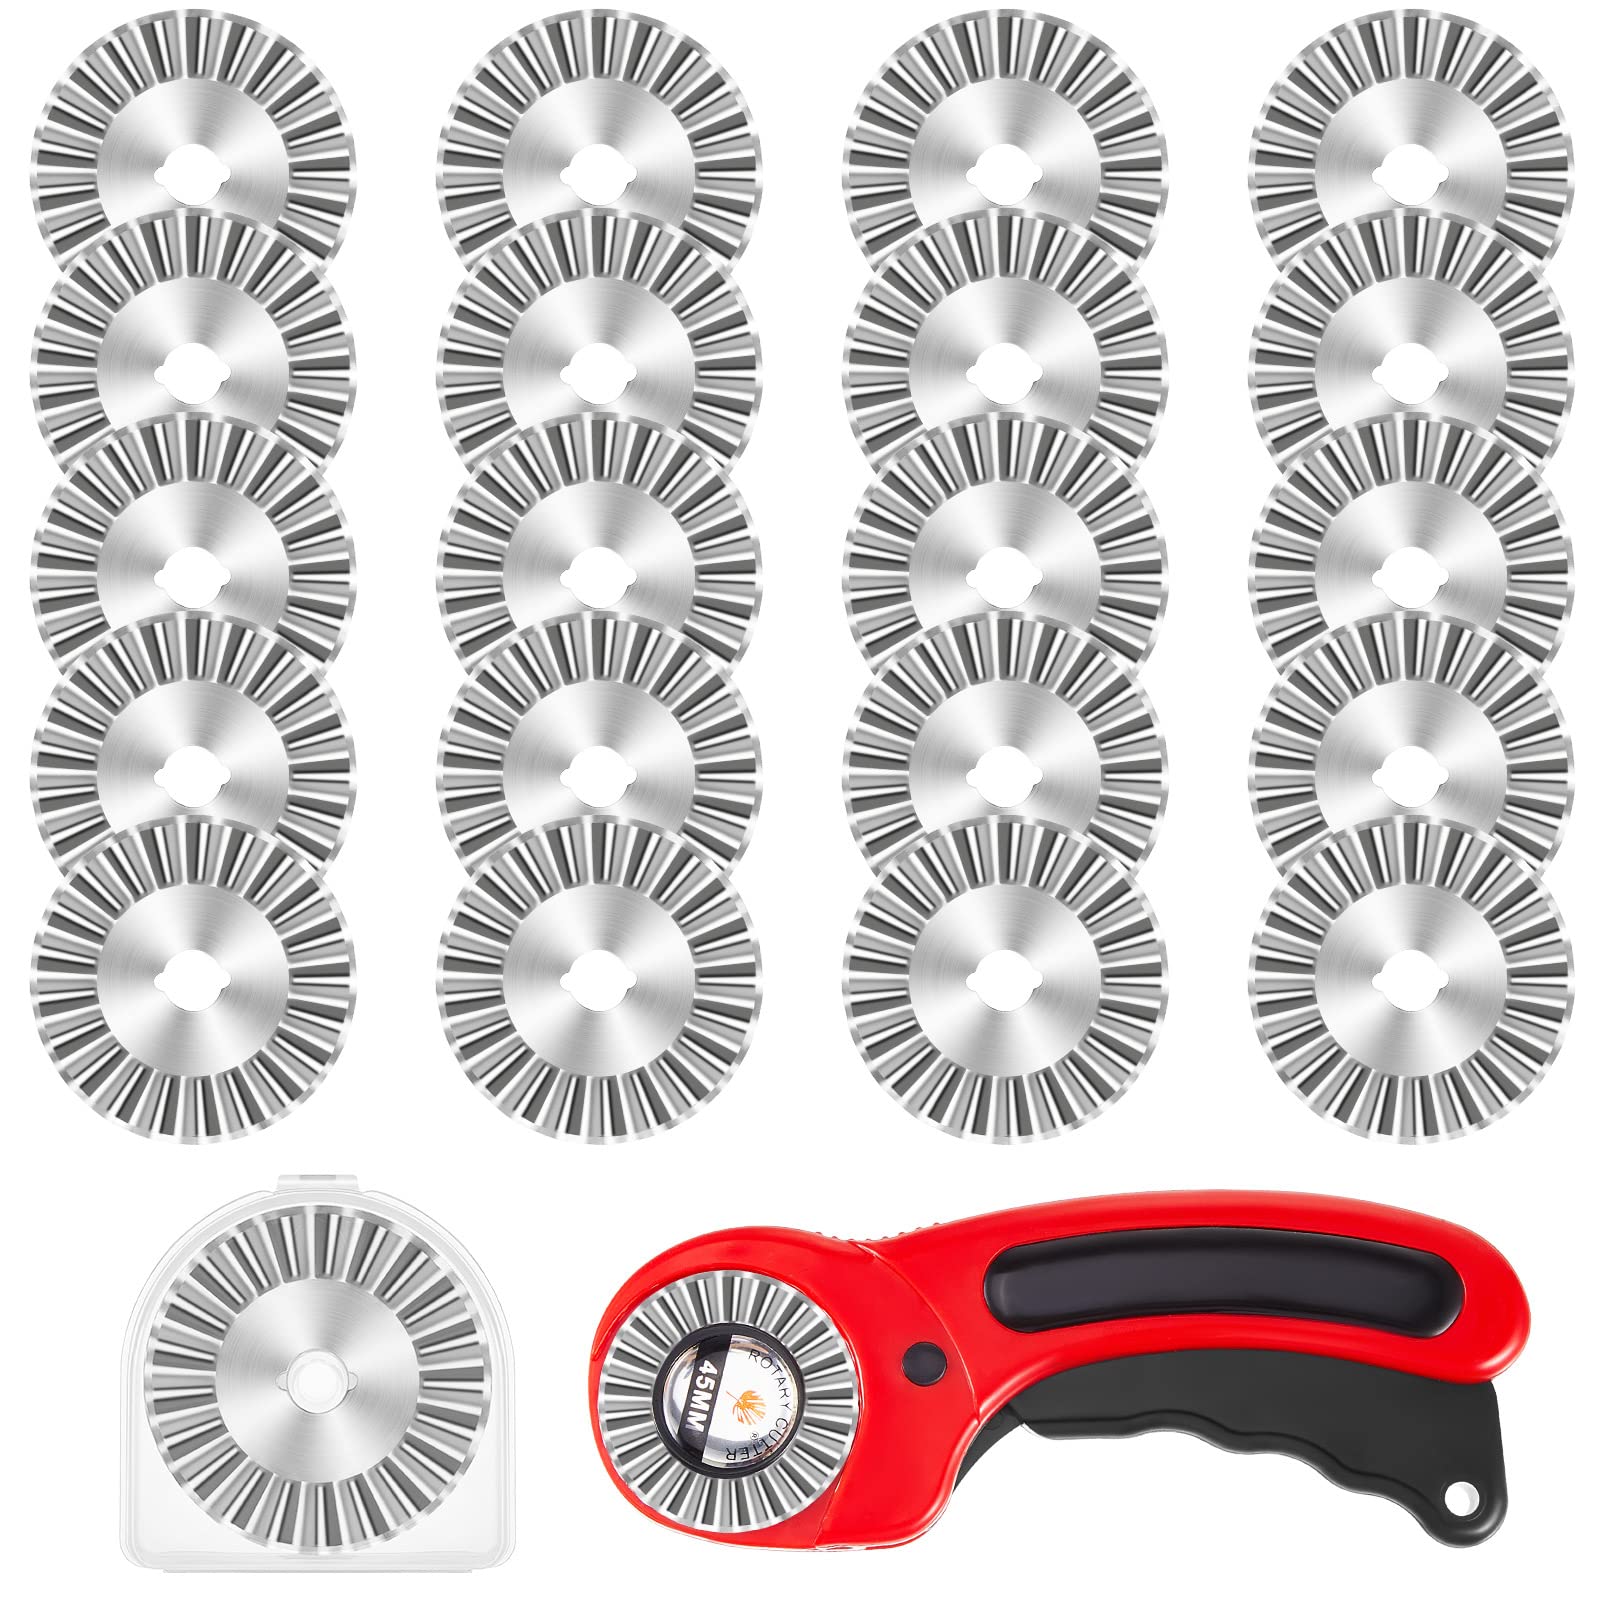 Rotary Cutter Blades - 45mm - Pinking Blade